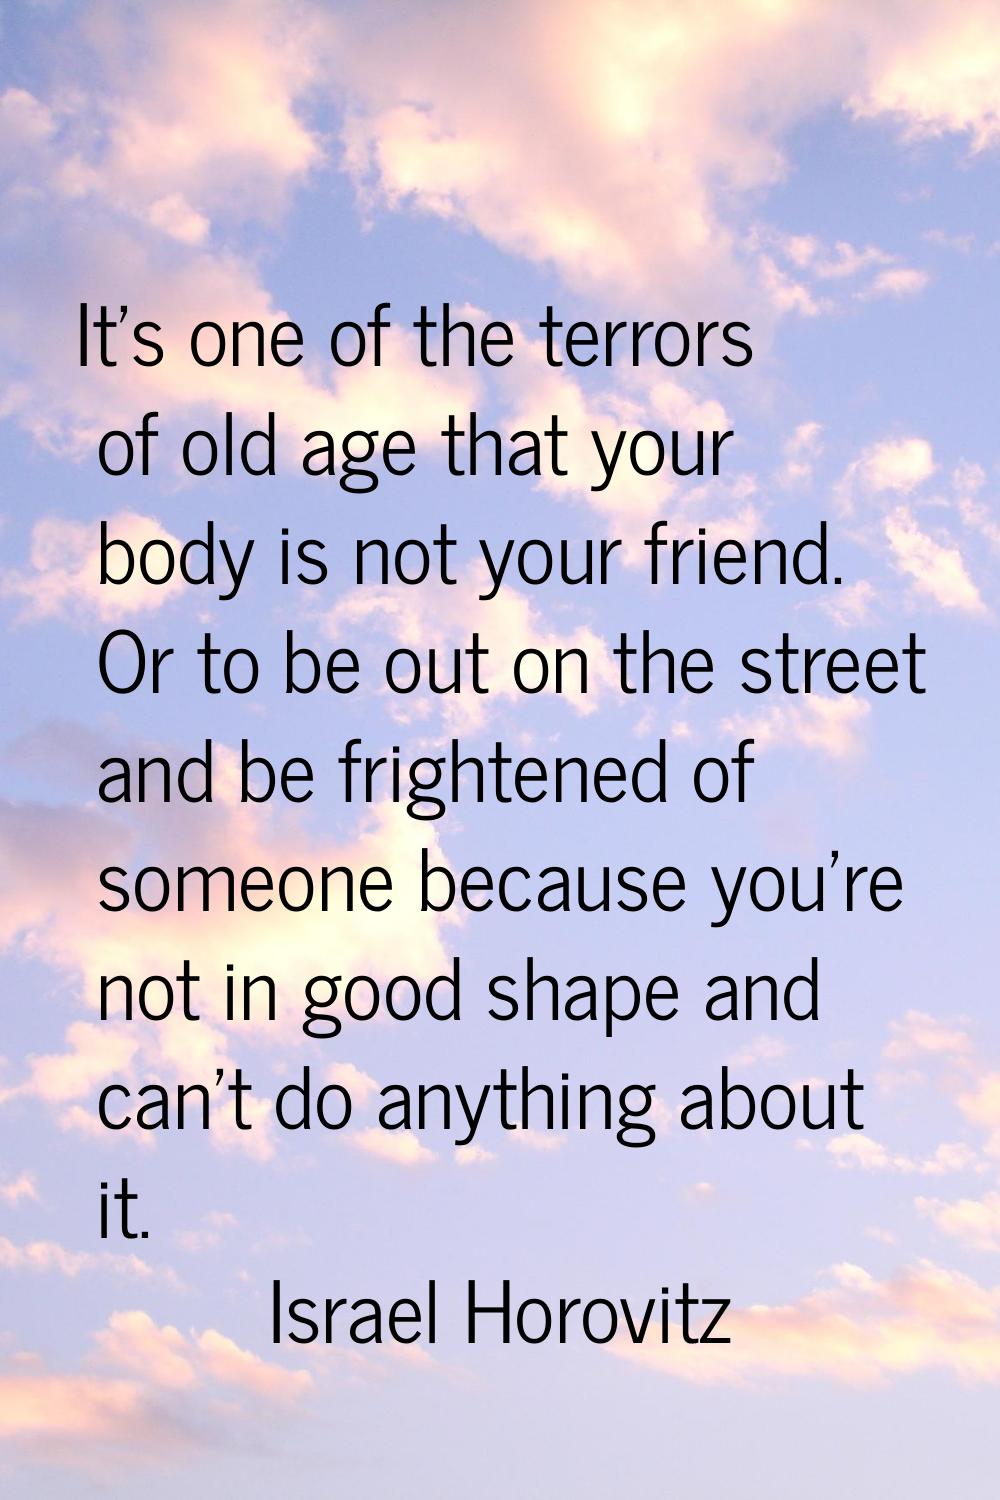 It's one of the terrors of old age that your body is not your friend. Or to be out on the street an